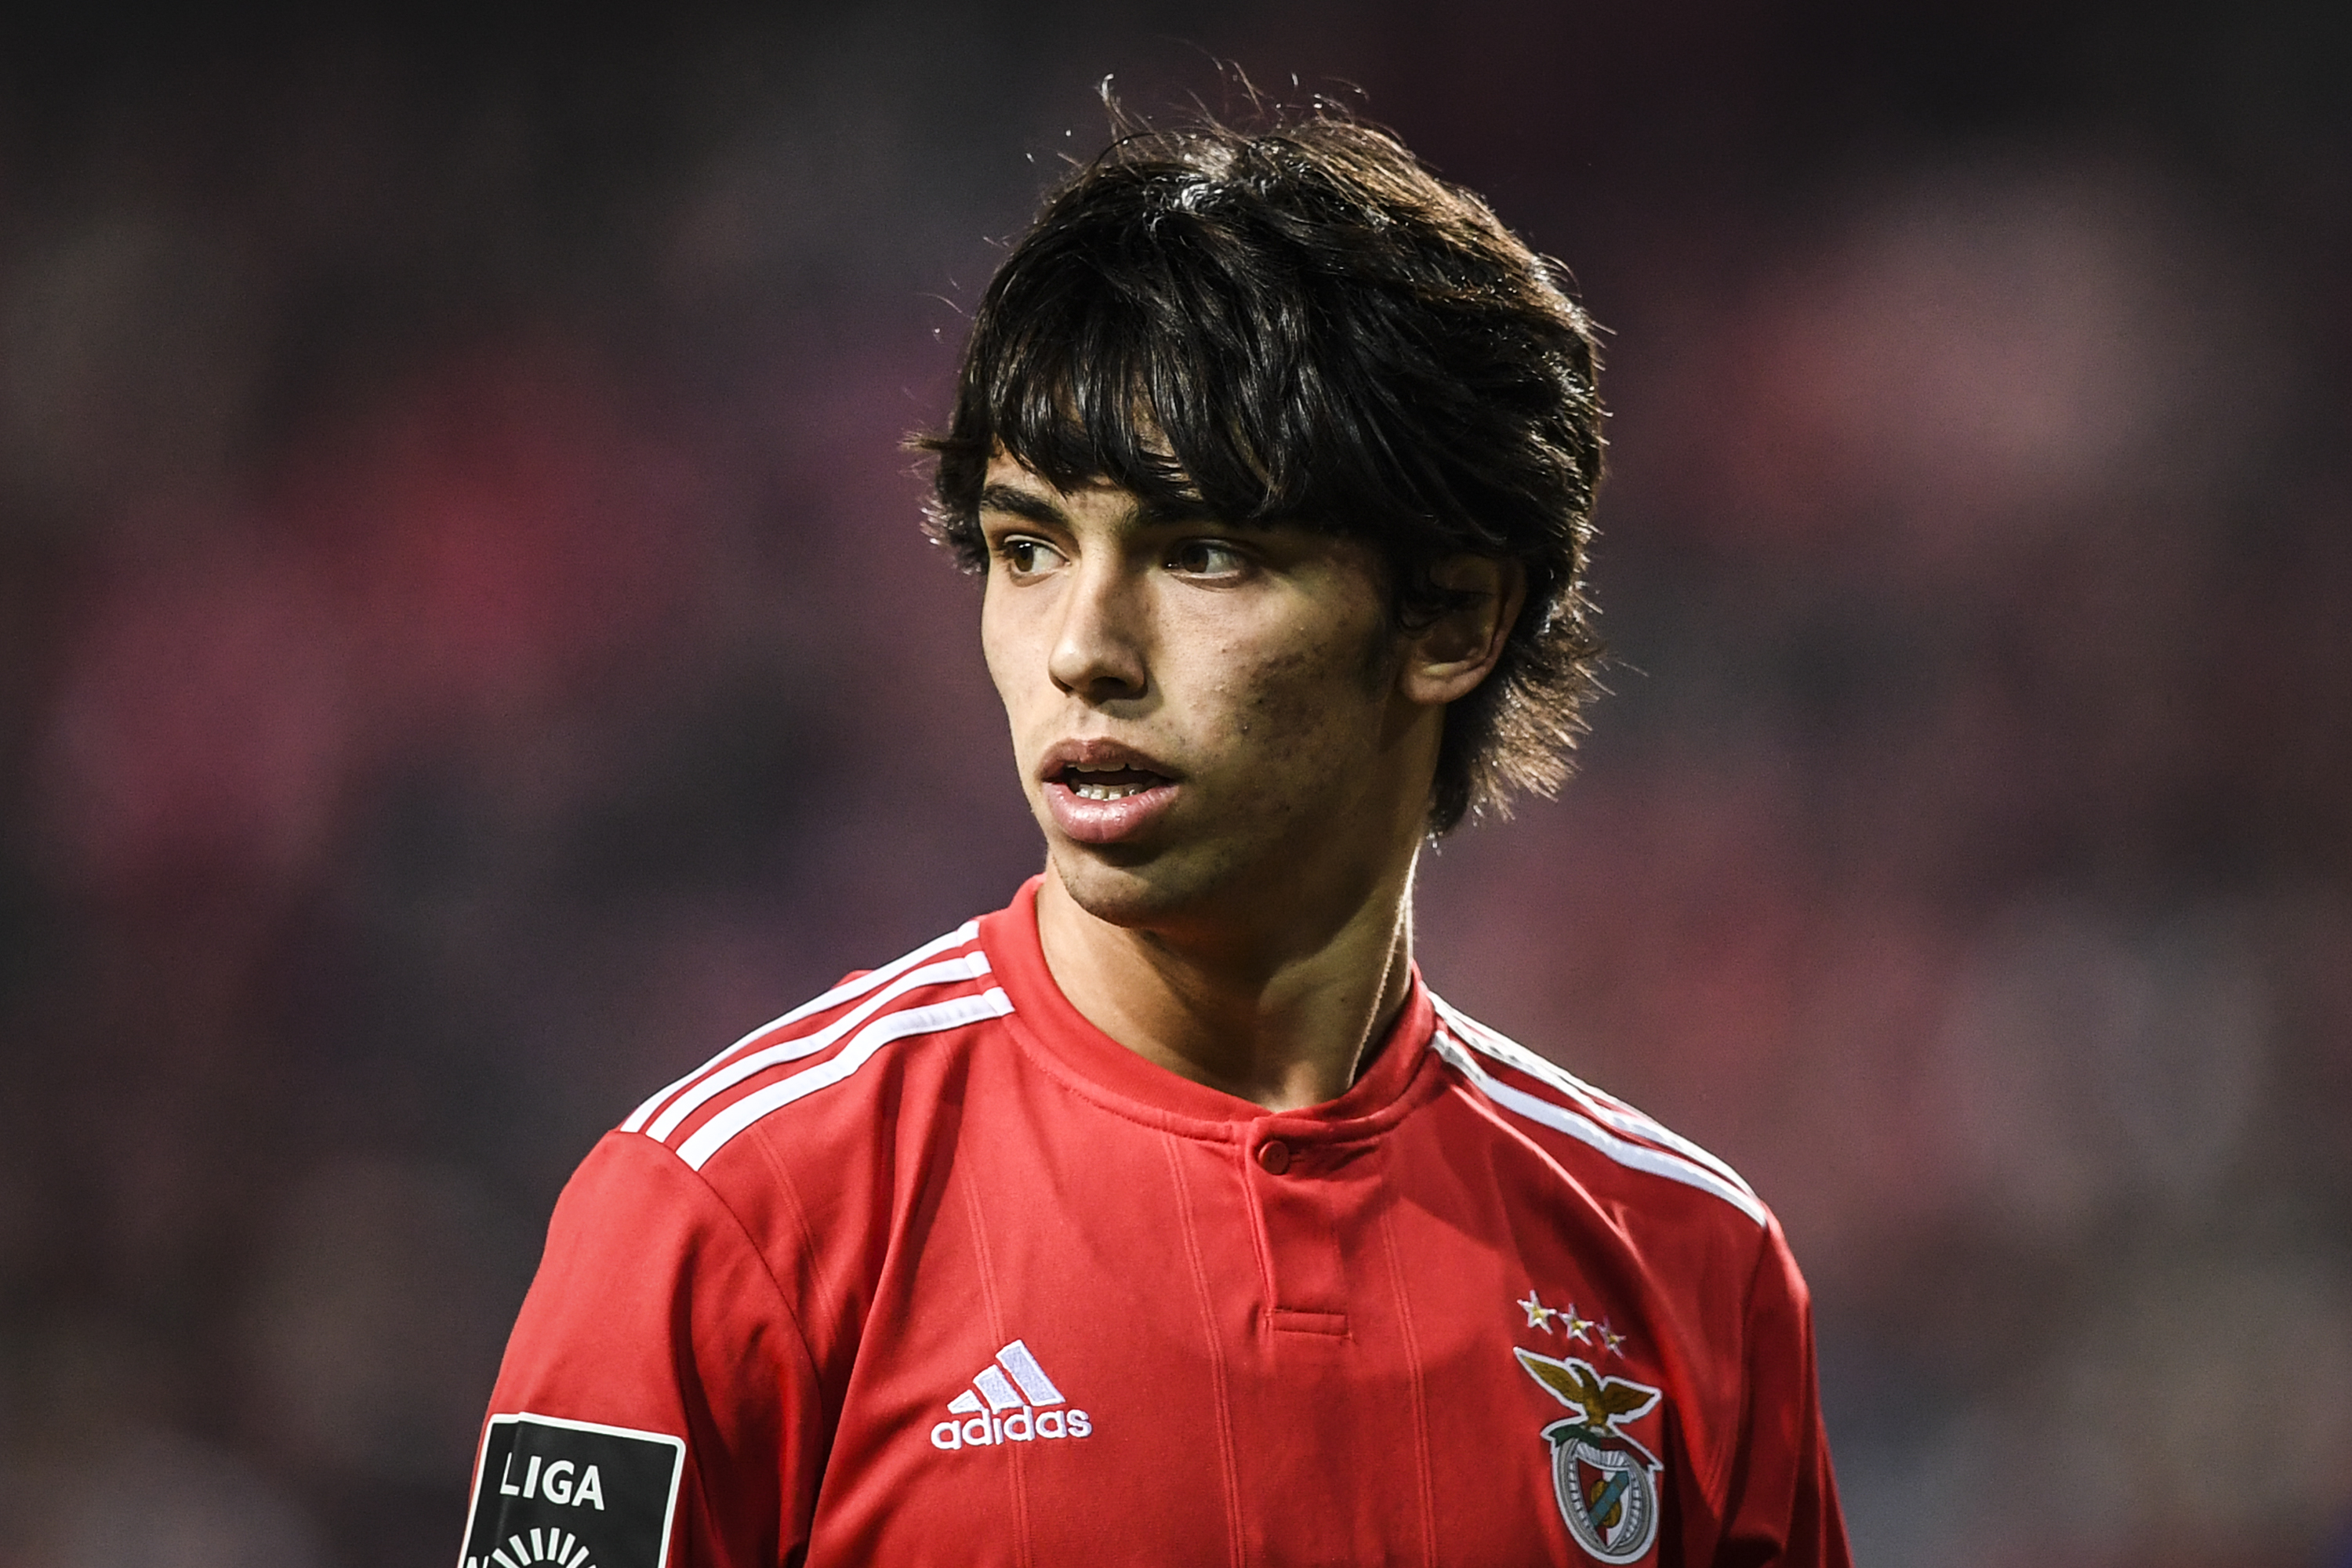 Benfica's Portuguese midfielder Joao Felix reacts during the Portuguese League football match between SL Benfica and Chaves at the Luz stadium on February 25, 2019. (Photo by PATRICIA DE MELO MOREIRA / AFP)        (Photo credit should read PATRICIA DE MELO MOREIRA/AFP/Getty Images)